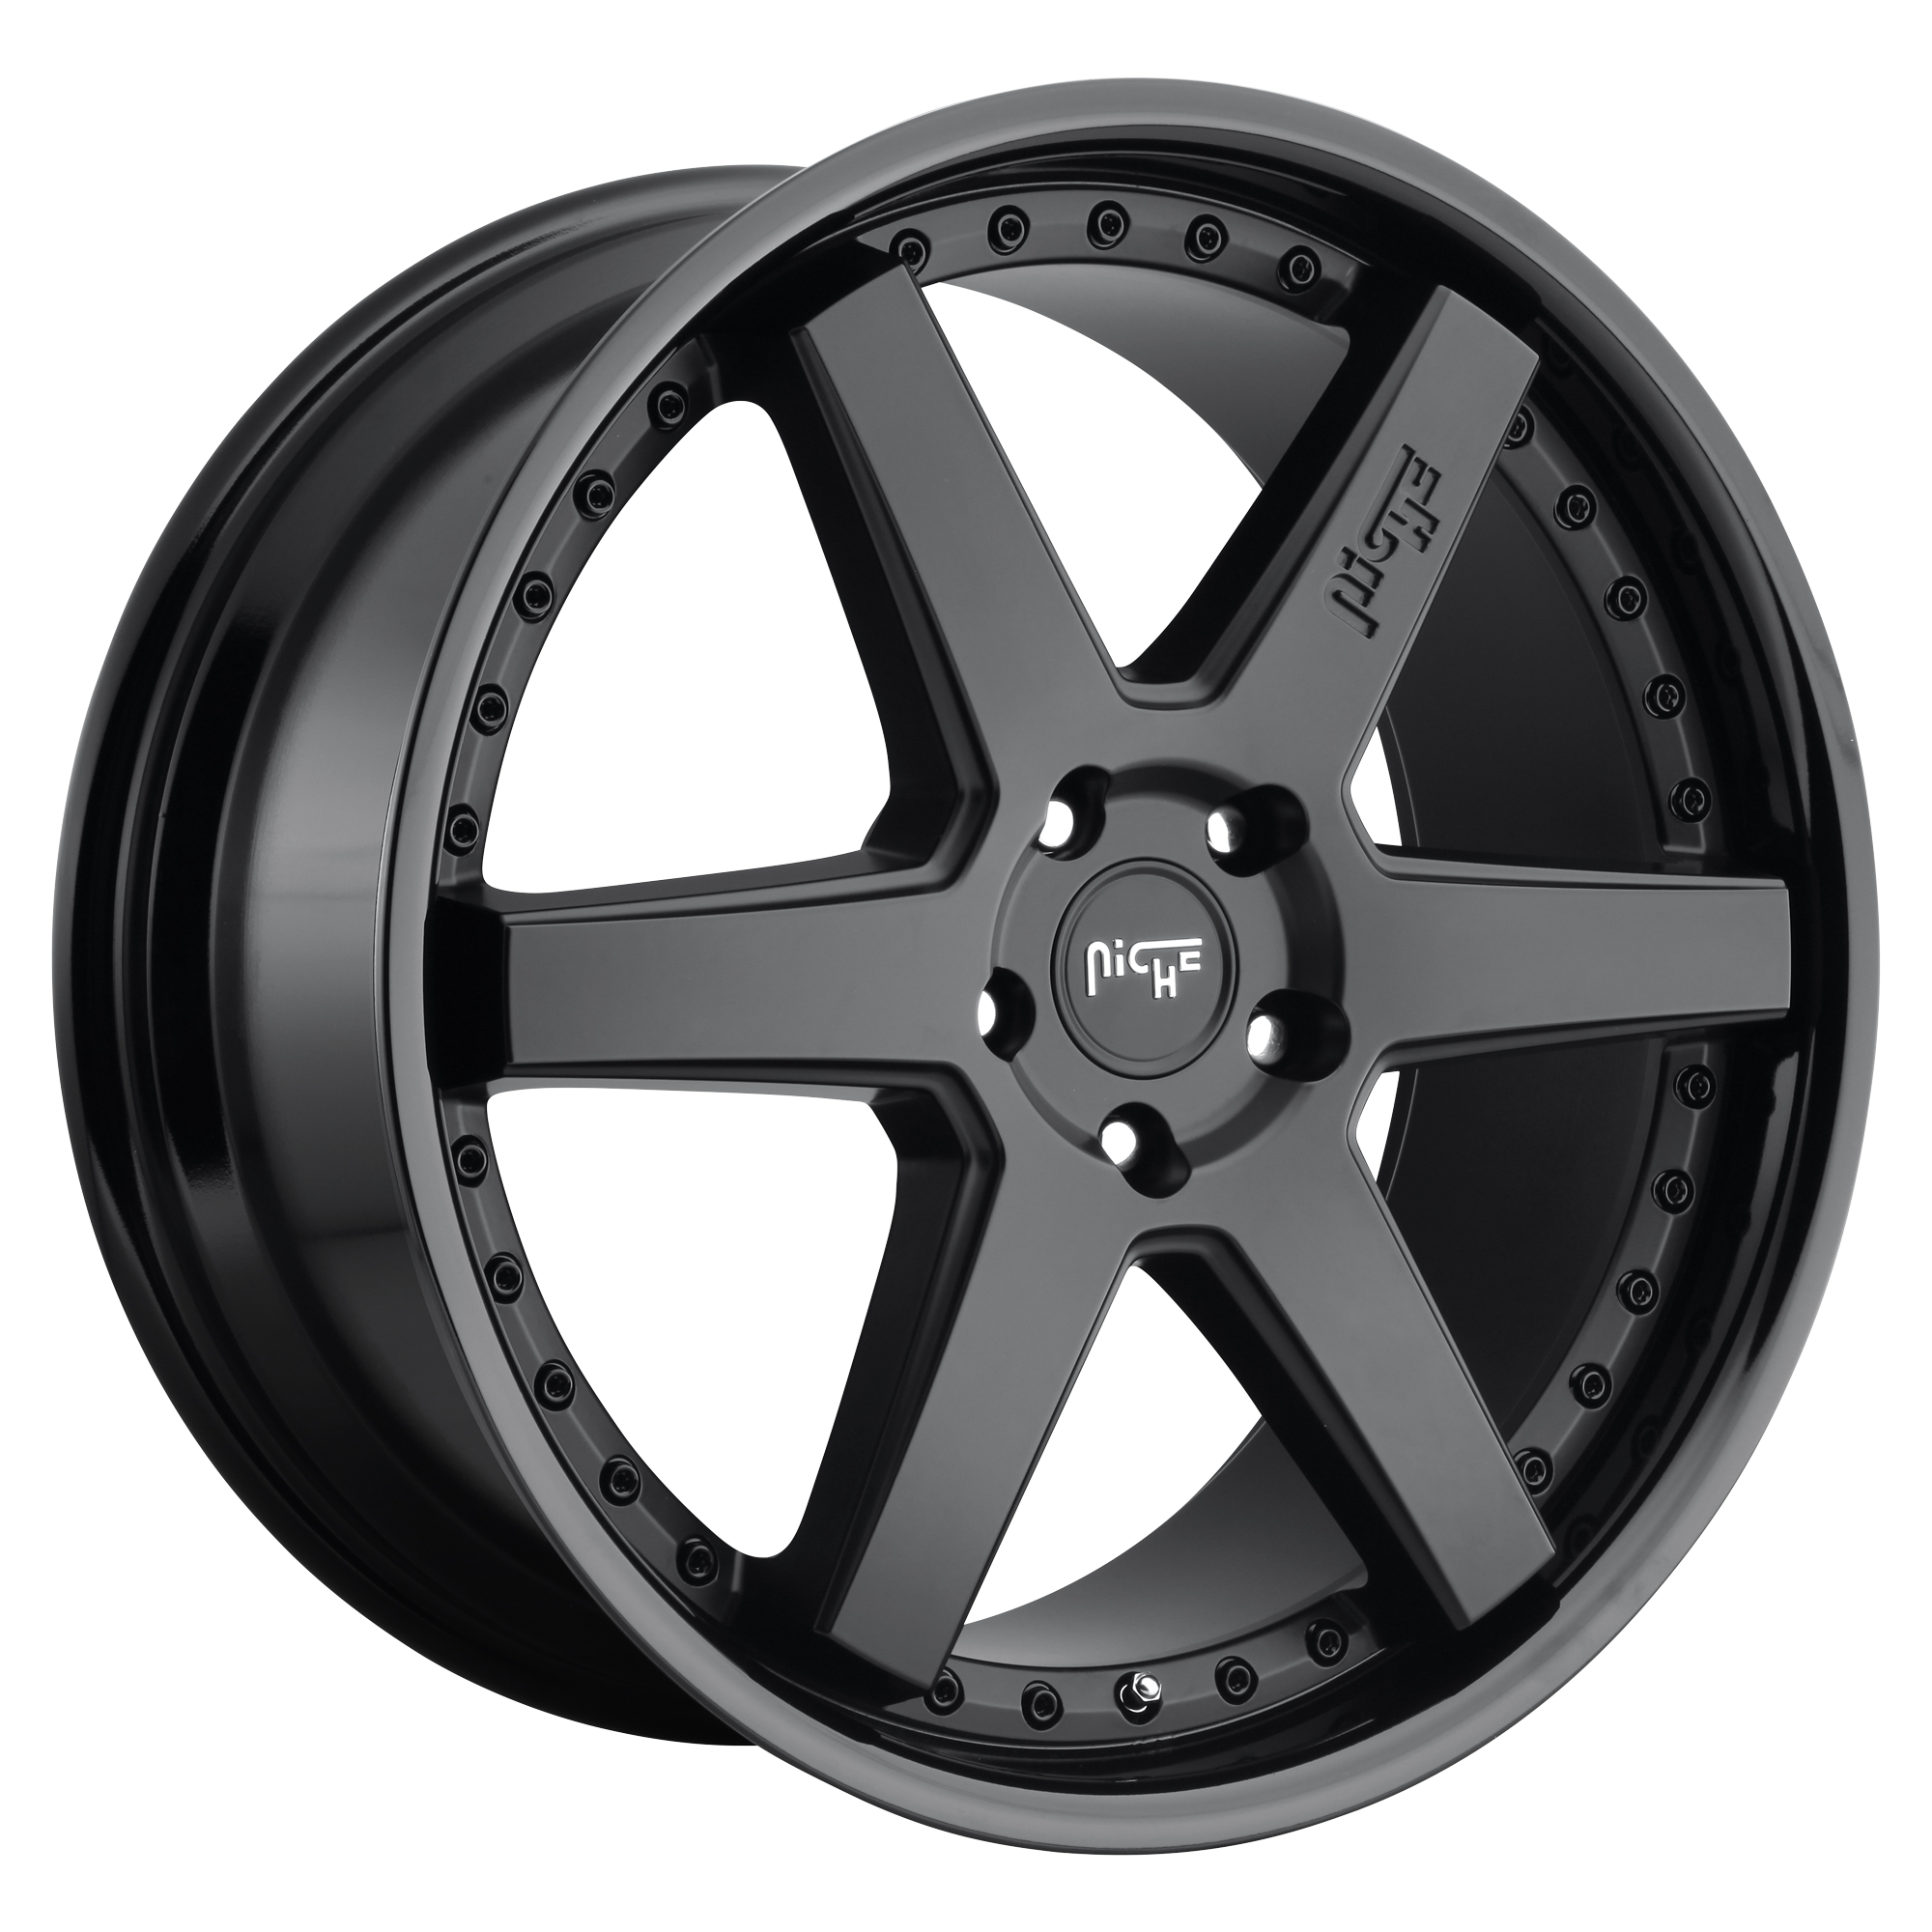 ALTAIR 20x10.5 5x114.30 GLOSS BLACK MATTE BLACK (40 mm) - Tires and Engine Performance